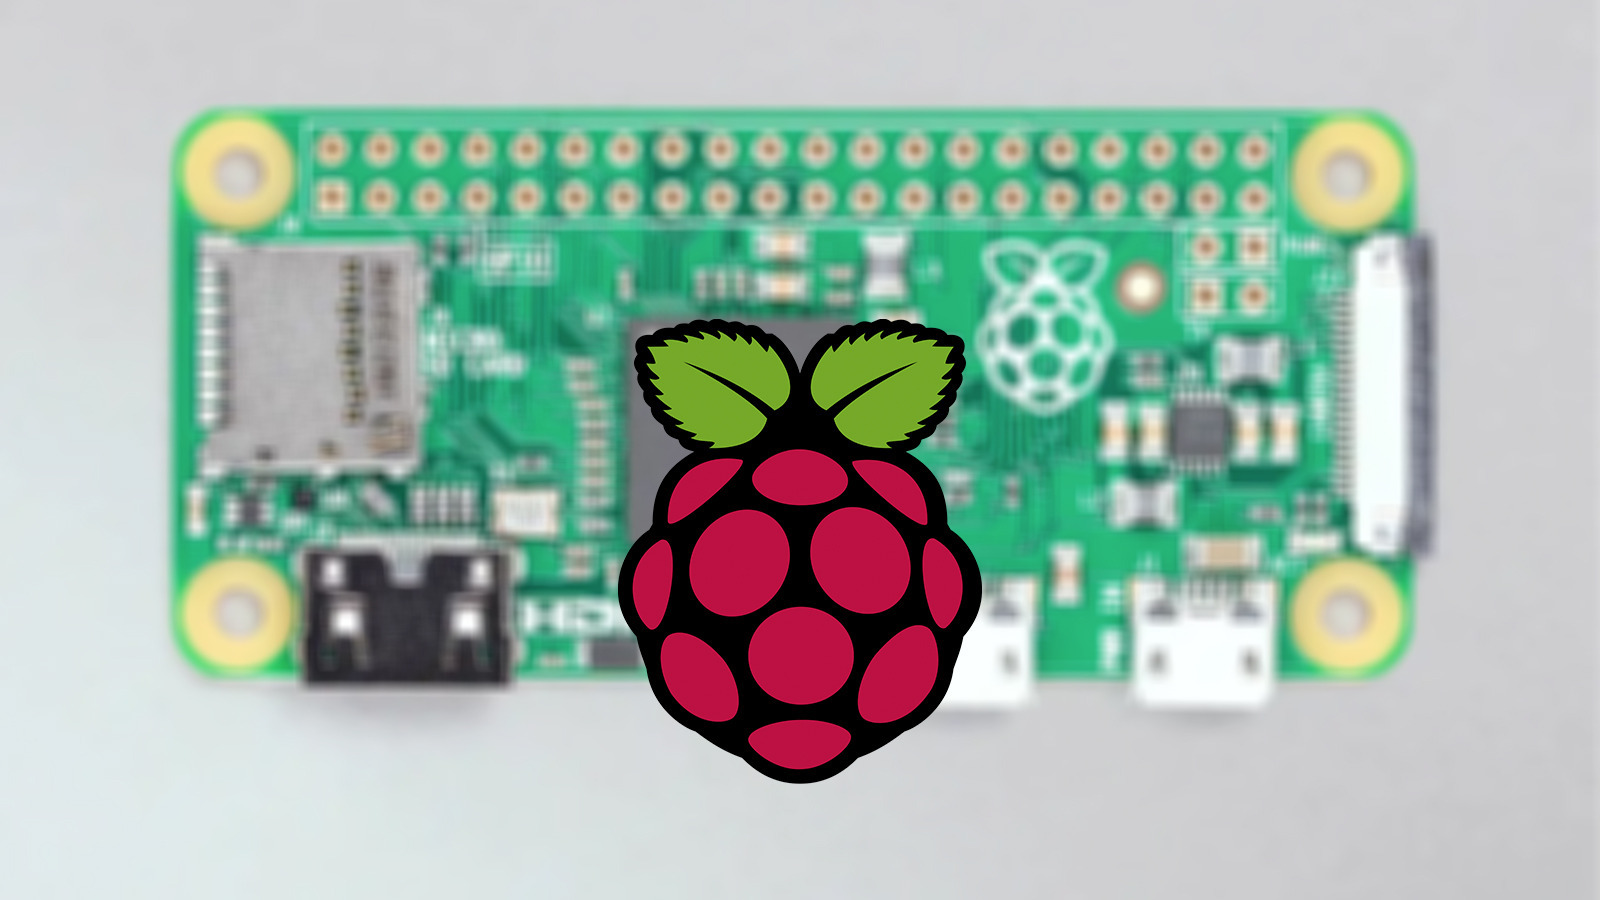 Raspberry Pi Zero: What Are The Pros & Cons Of Building With This Computer?